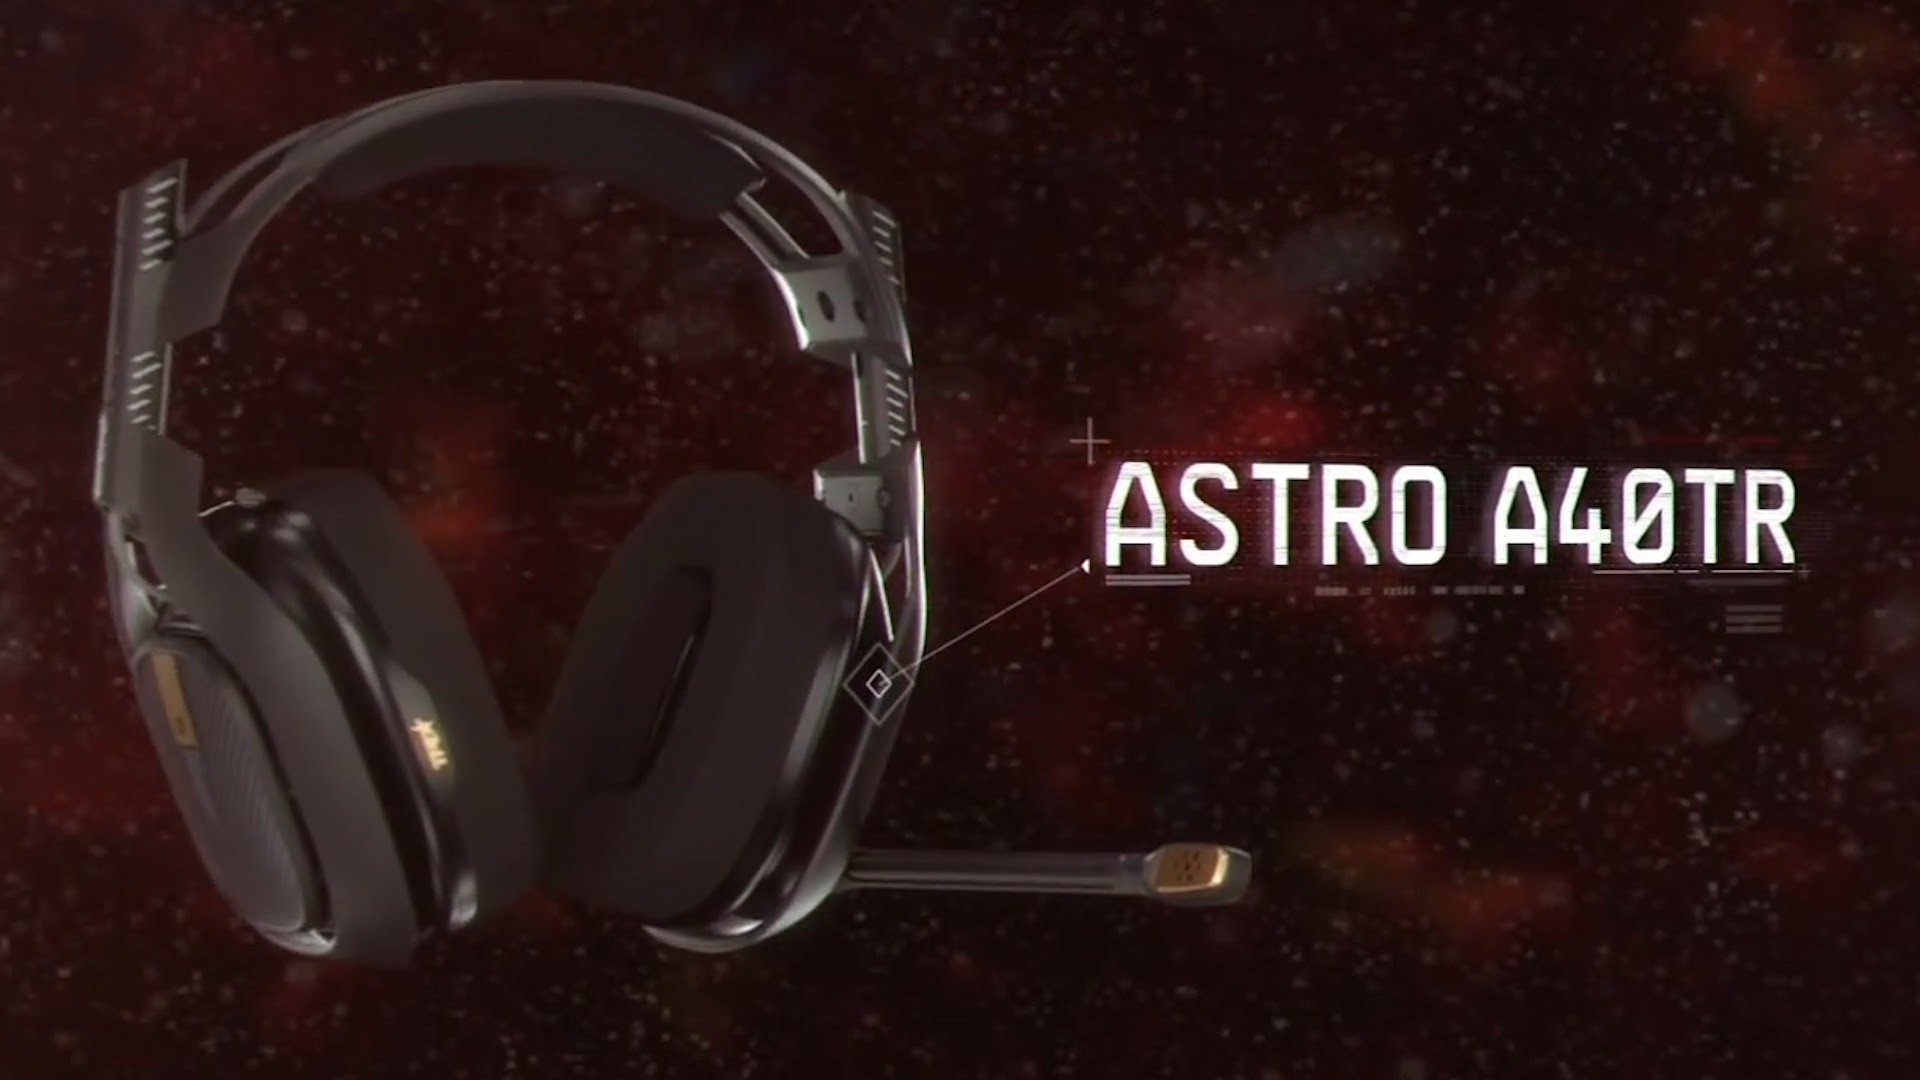 1920x1080 Checking Out PS4 & Xbox One's A40TR Astro Gaming Headset & Amp - IGN Access  - YouTube